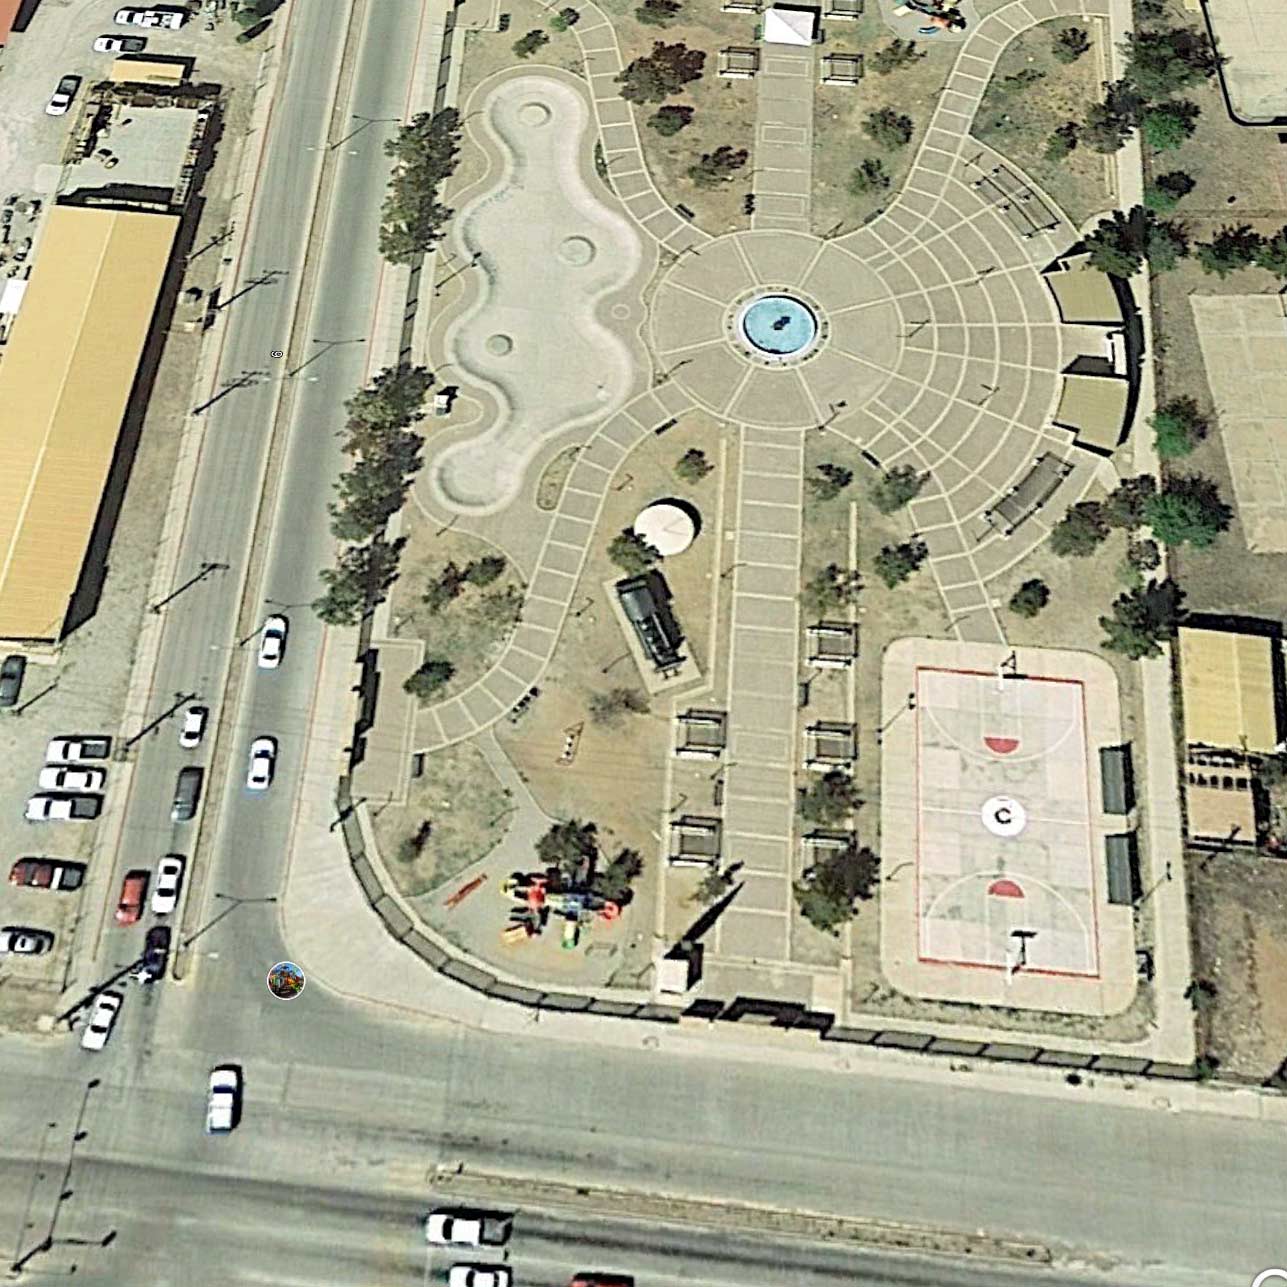 cananea-number-7-in-dif-park.jpg